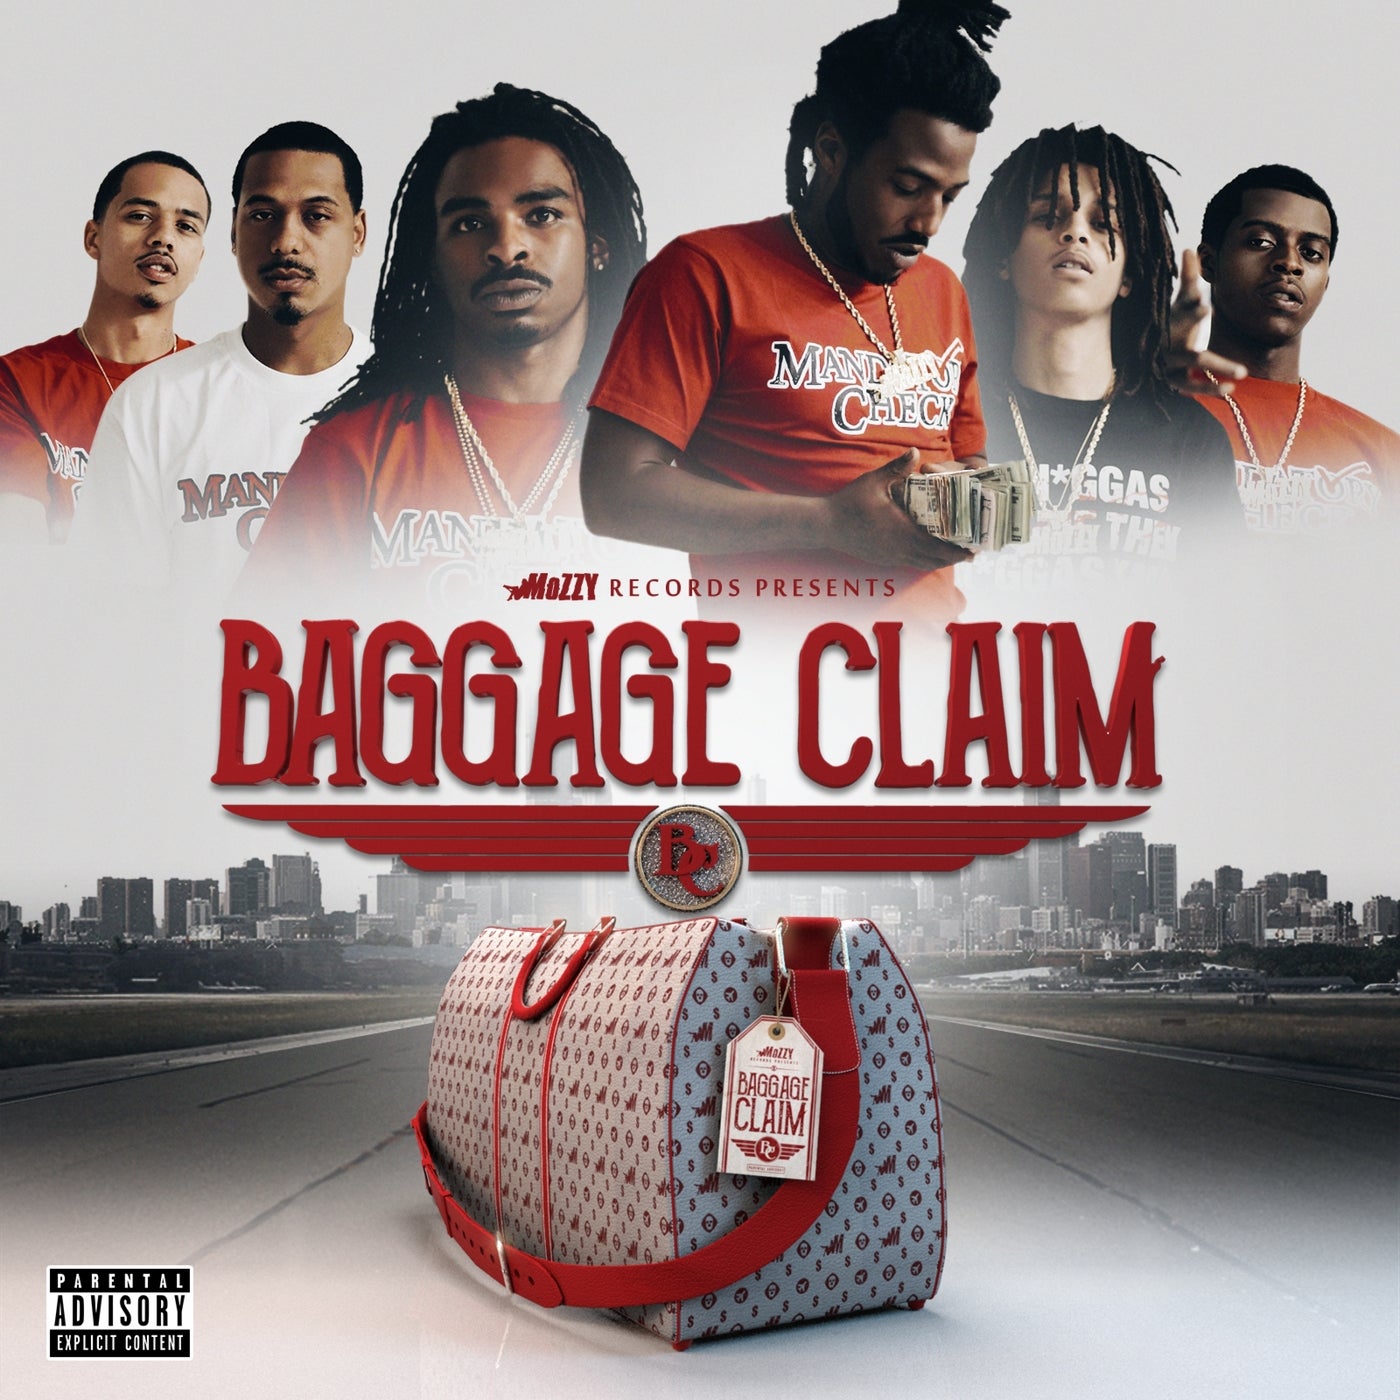 Mozzy Records Presents: Baggage Claim by E Mozzy, Mozzy, Celly Ru 